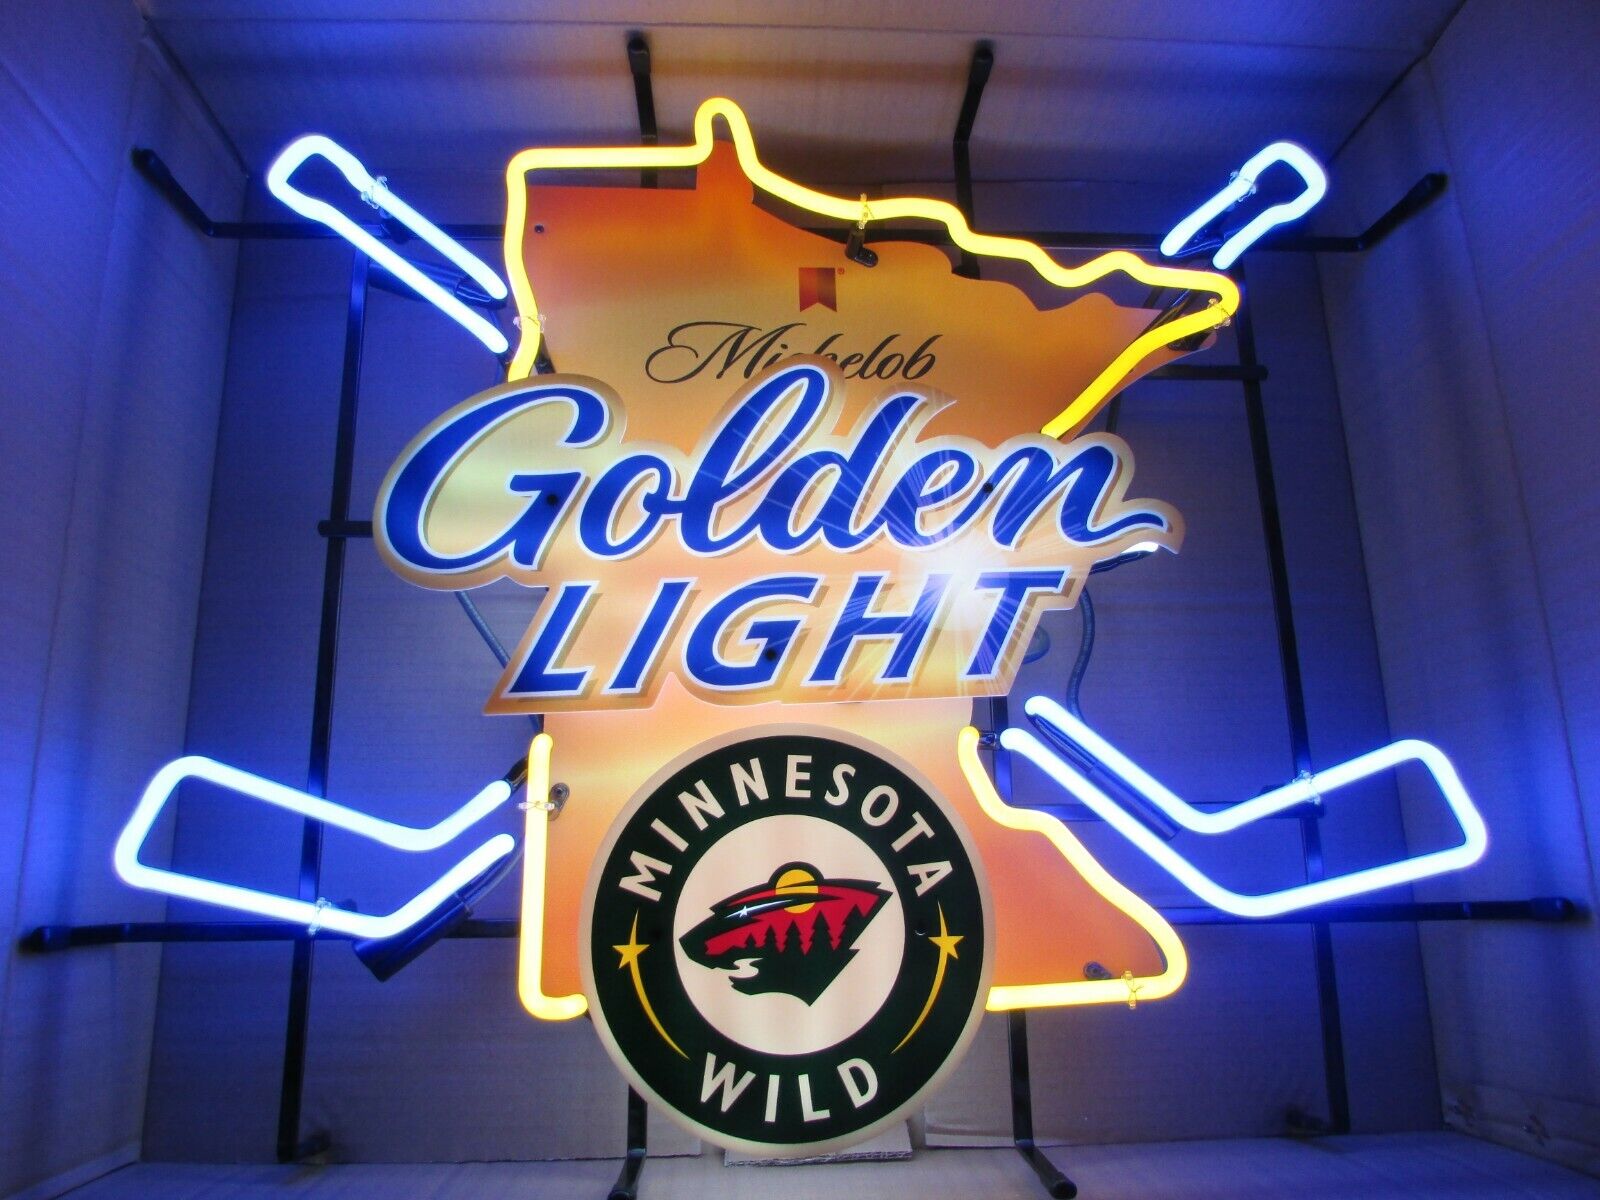 PICK UP ONLY New NHL Minnesota Wild Michelob Golden Light Hockey beer Neon sign 